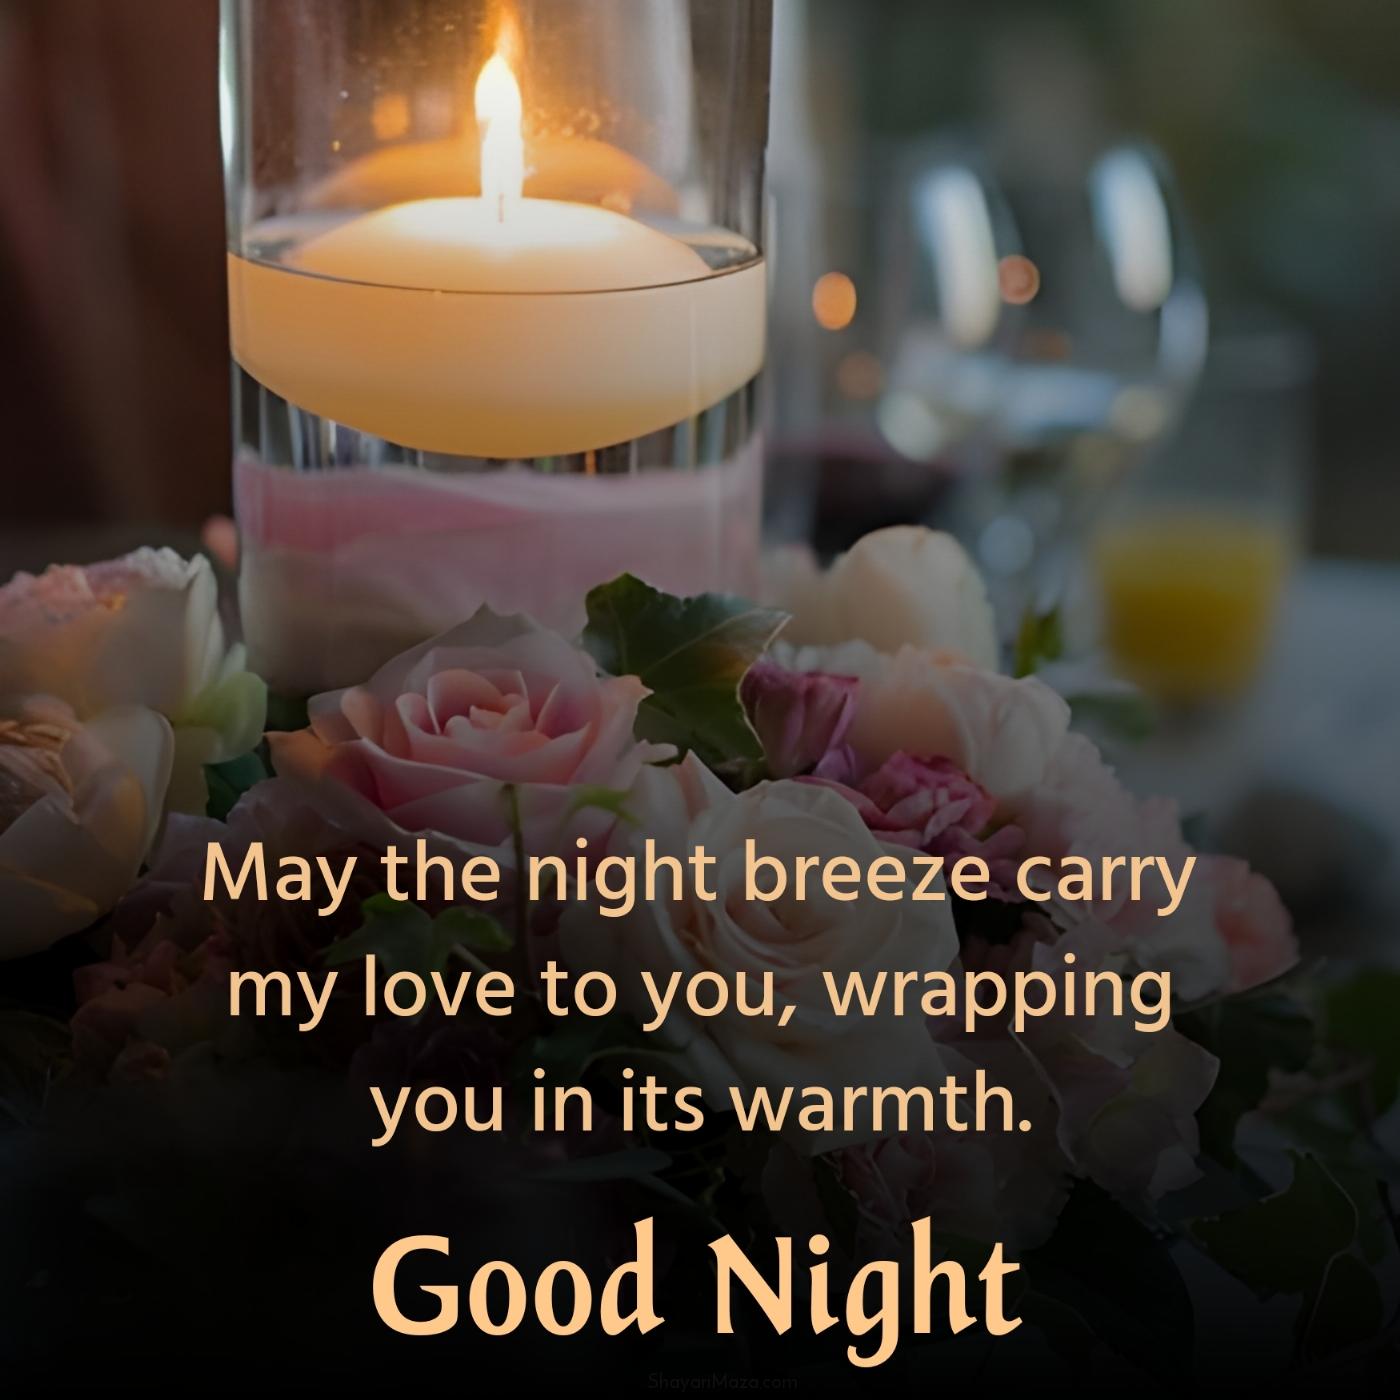 May the night breeze carry my love to you